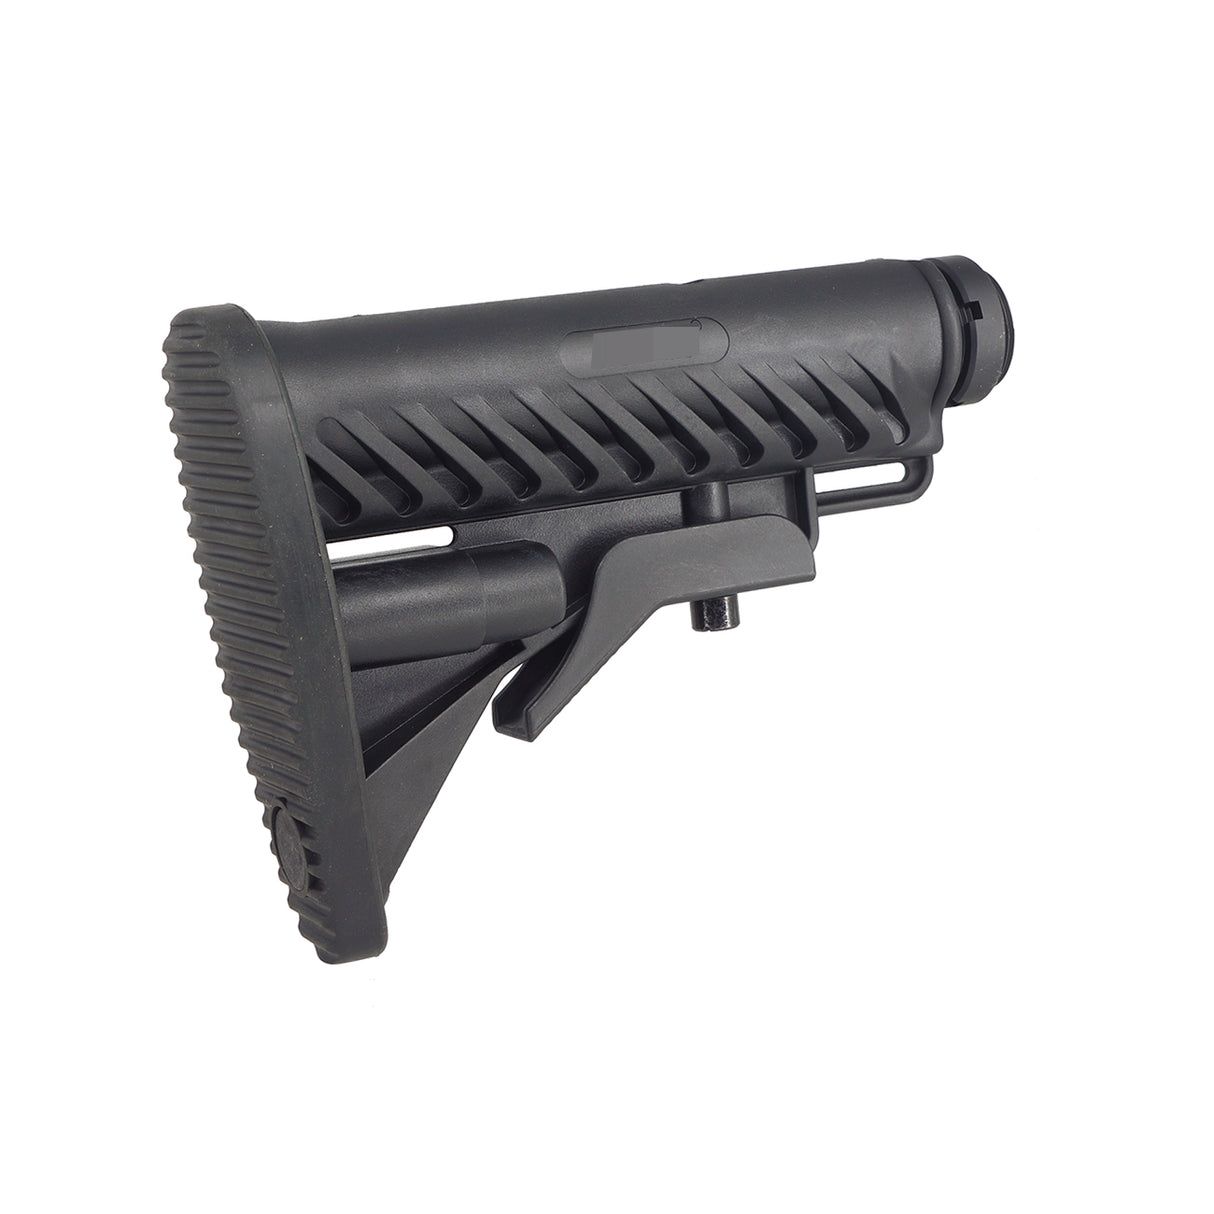 CYMA SIG Style Retractable Stock with Tube for M4 AEG ( CYMA-M003 )